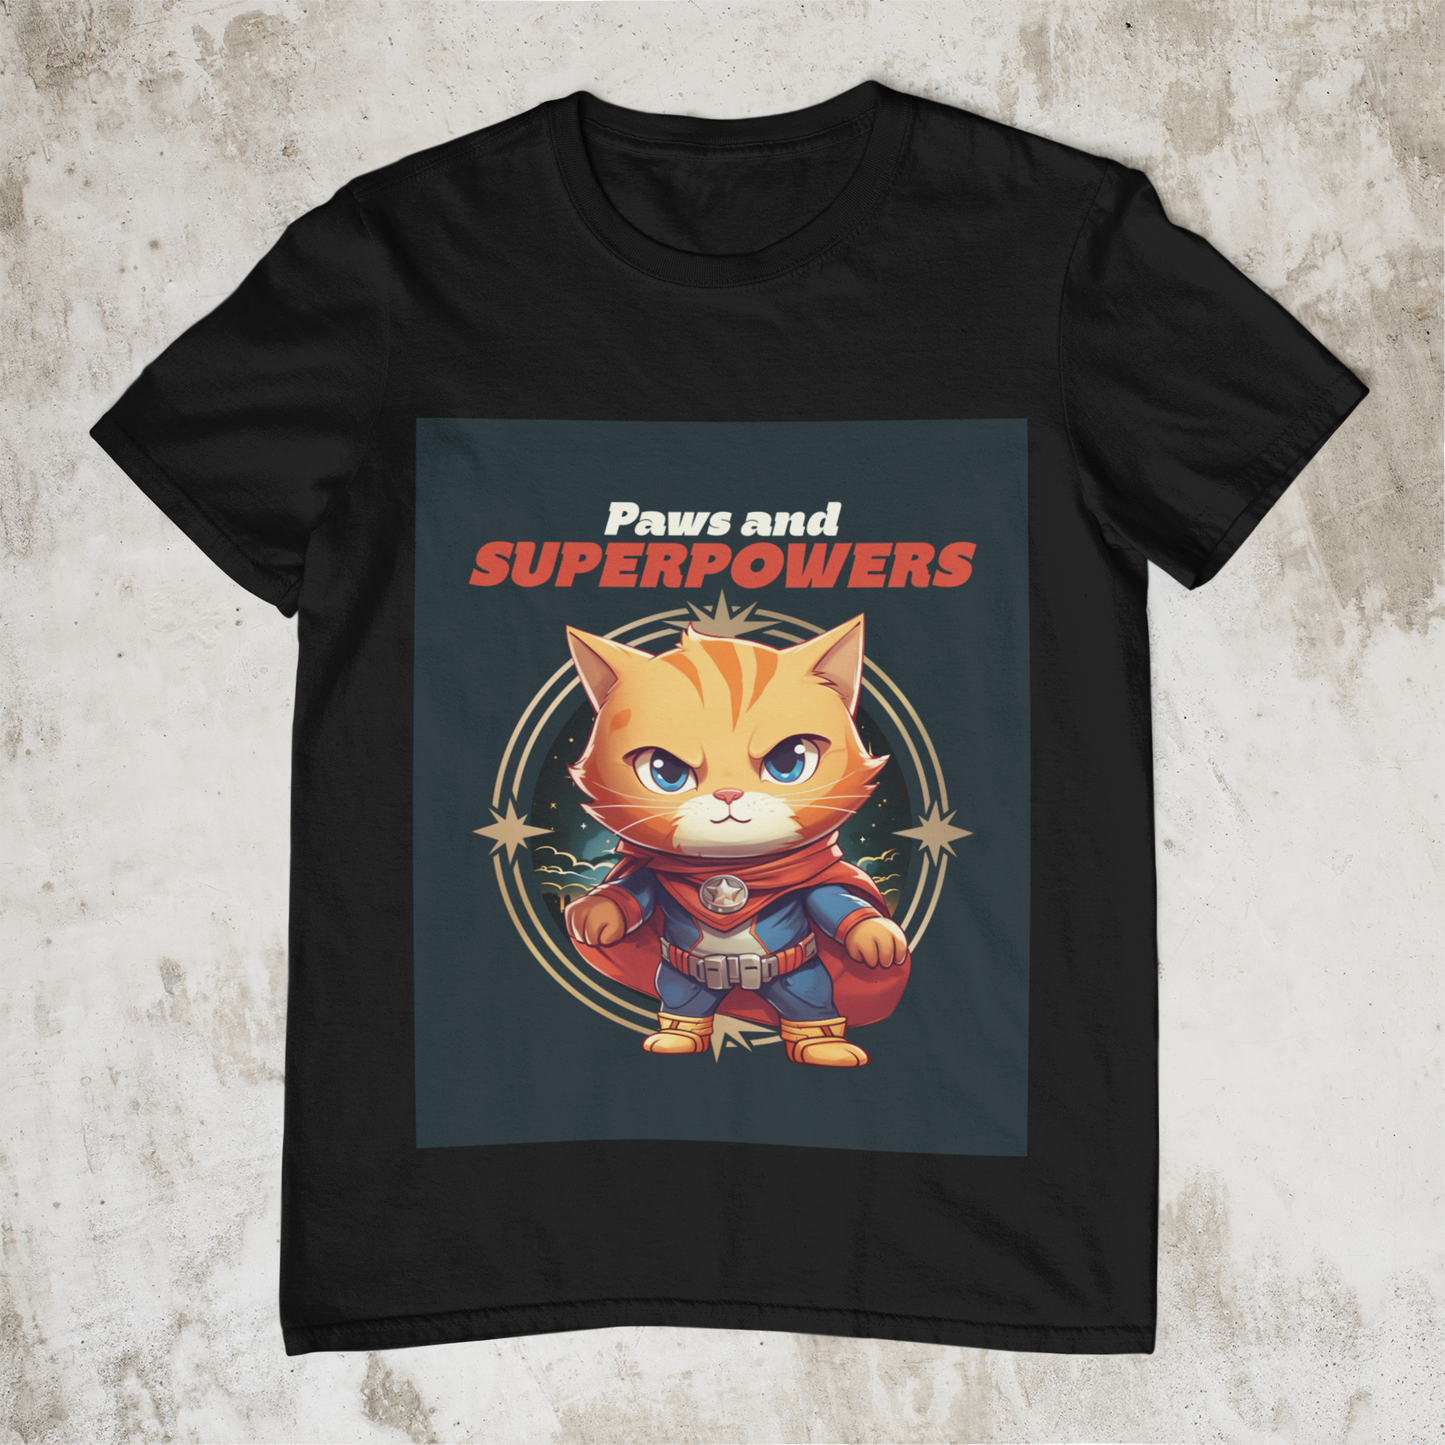 Paws and Super Powers Tee